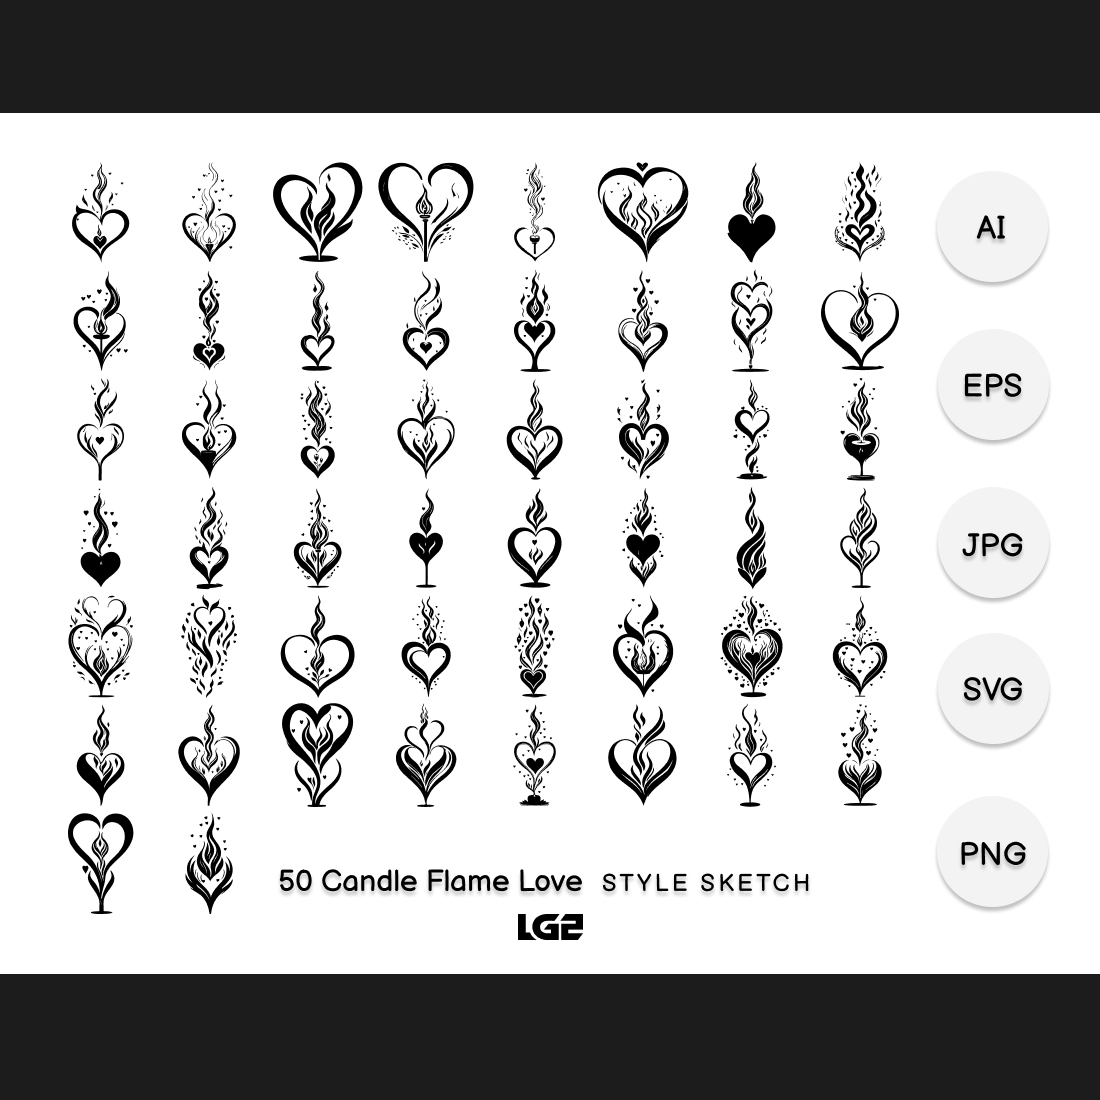 Candle Flame Love Element Draw Black cover image.